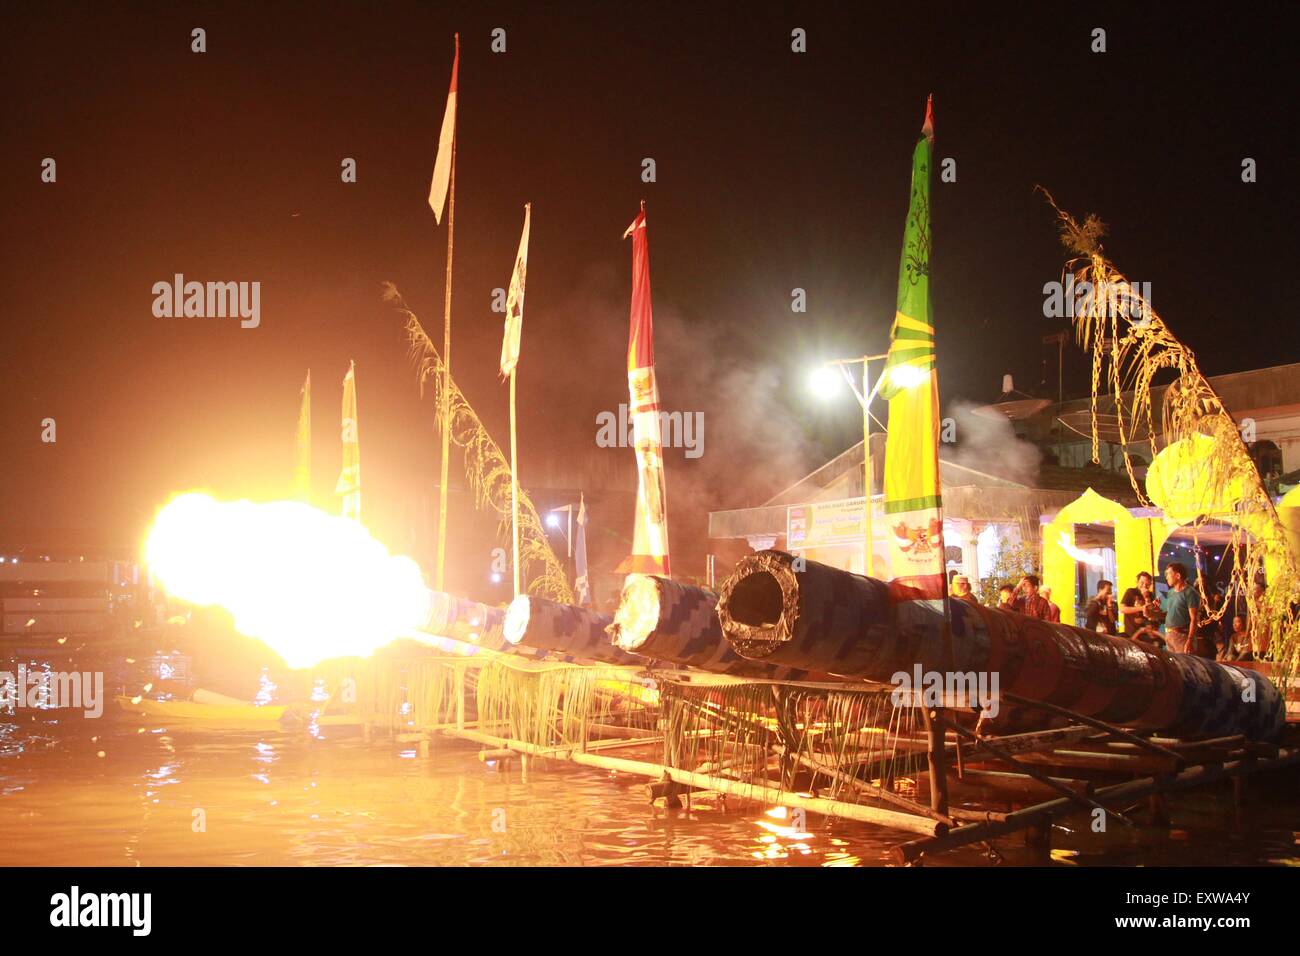 Pontianak, West Kalimantan, Indonesia. 16th July, 2015. PONTIANAK, INDONESIA - JULY 17: Indonesia muslim set fire to the carbide canon during Eid Fitr celebrate at Pontianak on July 17, 2015 in West Kalimantan Province, Indonesia. Carbide cannon is a tradition to welcome Eid on the banks of the river Kapuas, Pontianak, West Kalimantan. Cannon made of wood with an average length of 6 meters and a diameter of over 50 cm. Indonesia and muslima around the world celebrate Eid Fitr. © Sijori Images/ZUMA Wire/Alamy Live News Stock Photo